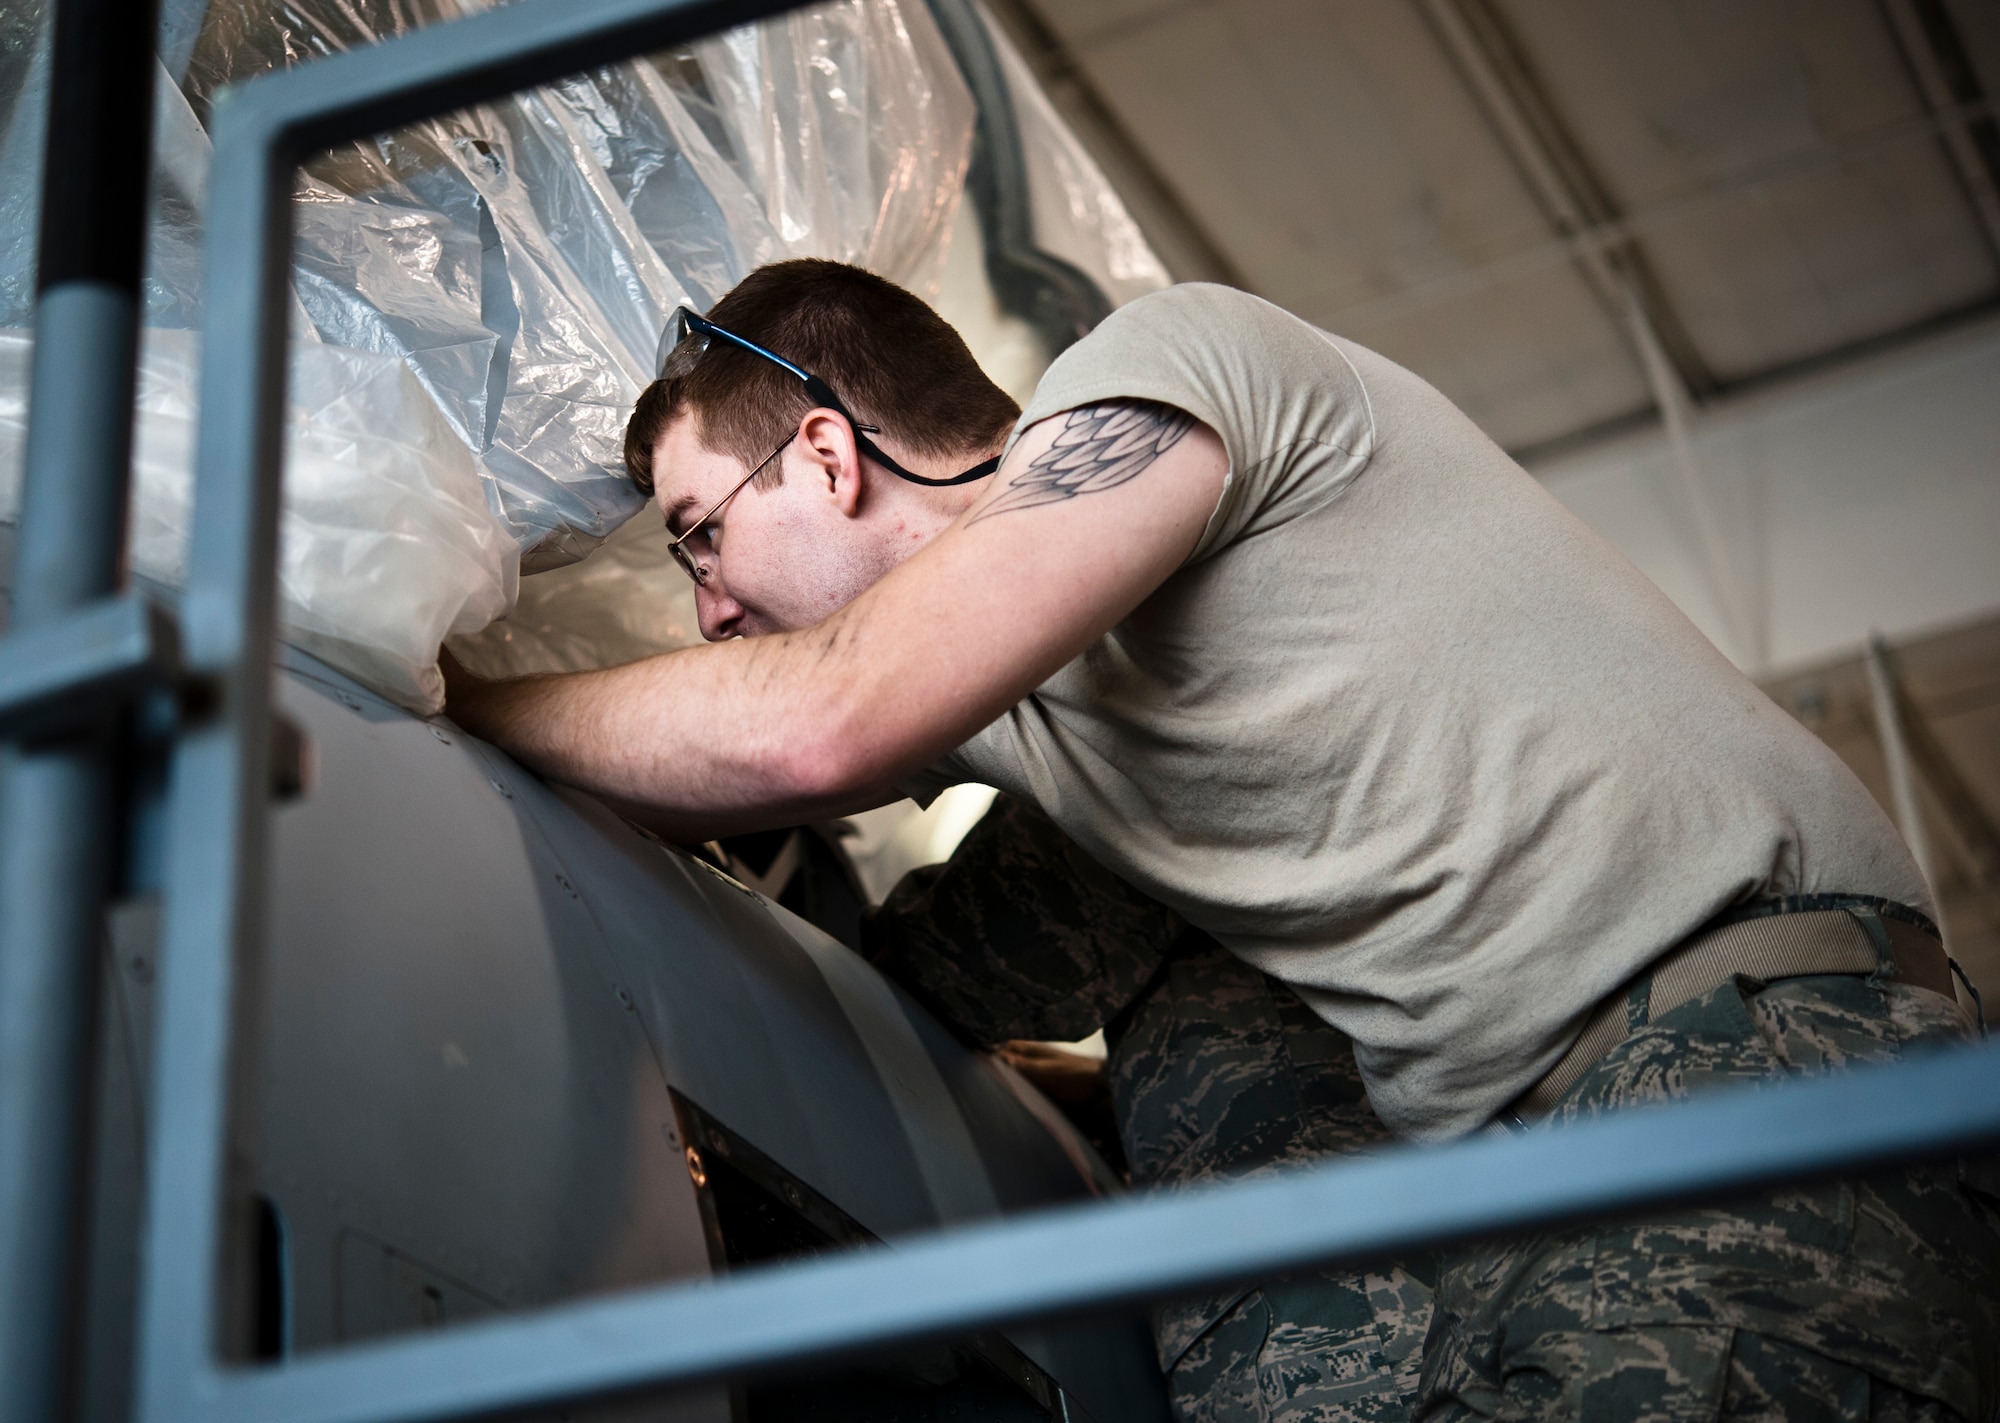 Senior Airman Daniel Hensley, 442nd Aircraft Maintenance Squadron electro-environmental technician from Sedalia, Missouri, performs maintenance work on an A-10 Thunderbolt II, May 15, 2014 at Whiteman Air Force Base, Missouri. Electro-environment technicians are responsible for performing and supervising aircraft electrical and environmental functions and activities. (U.S. Air Force photo by Senior Airman Daniel Phelps/Released)